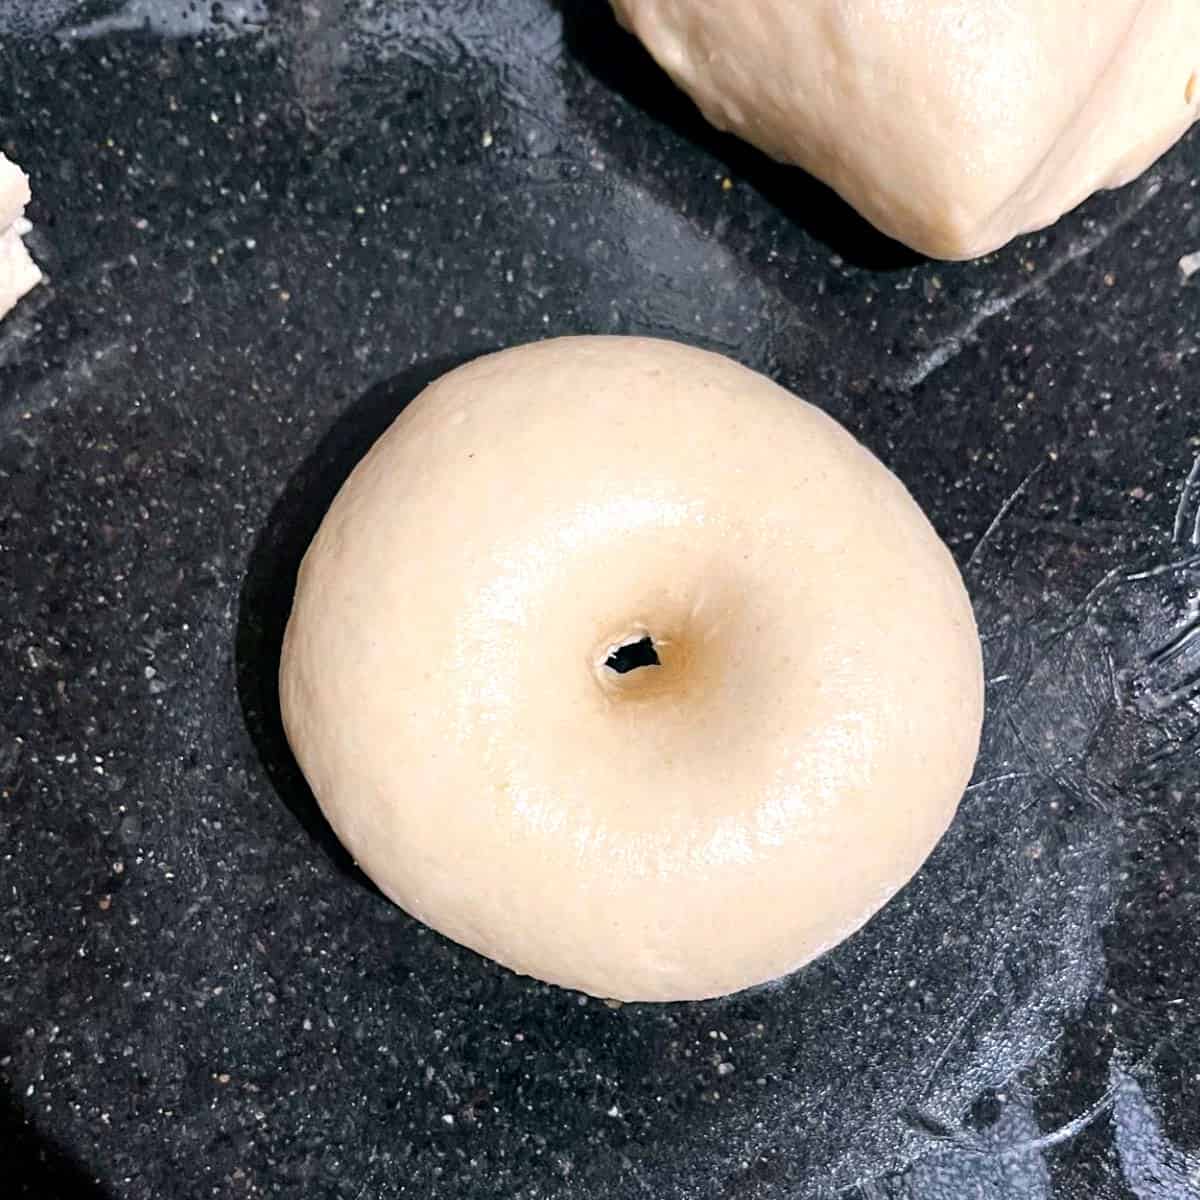 Bagel round with hole in center.